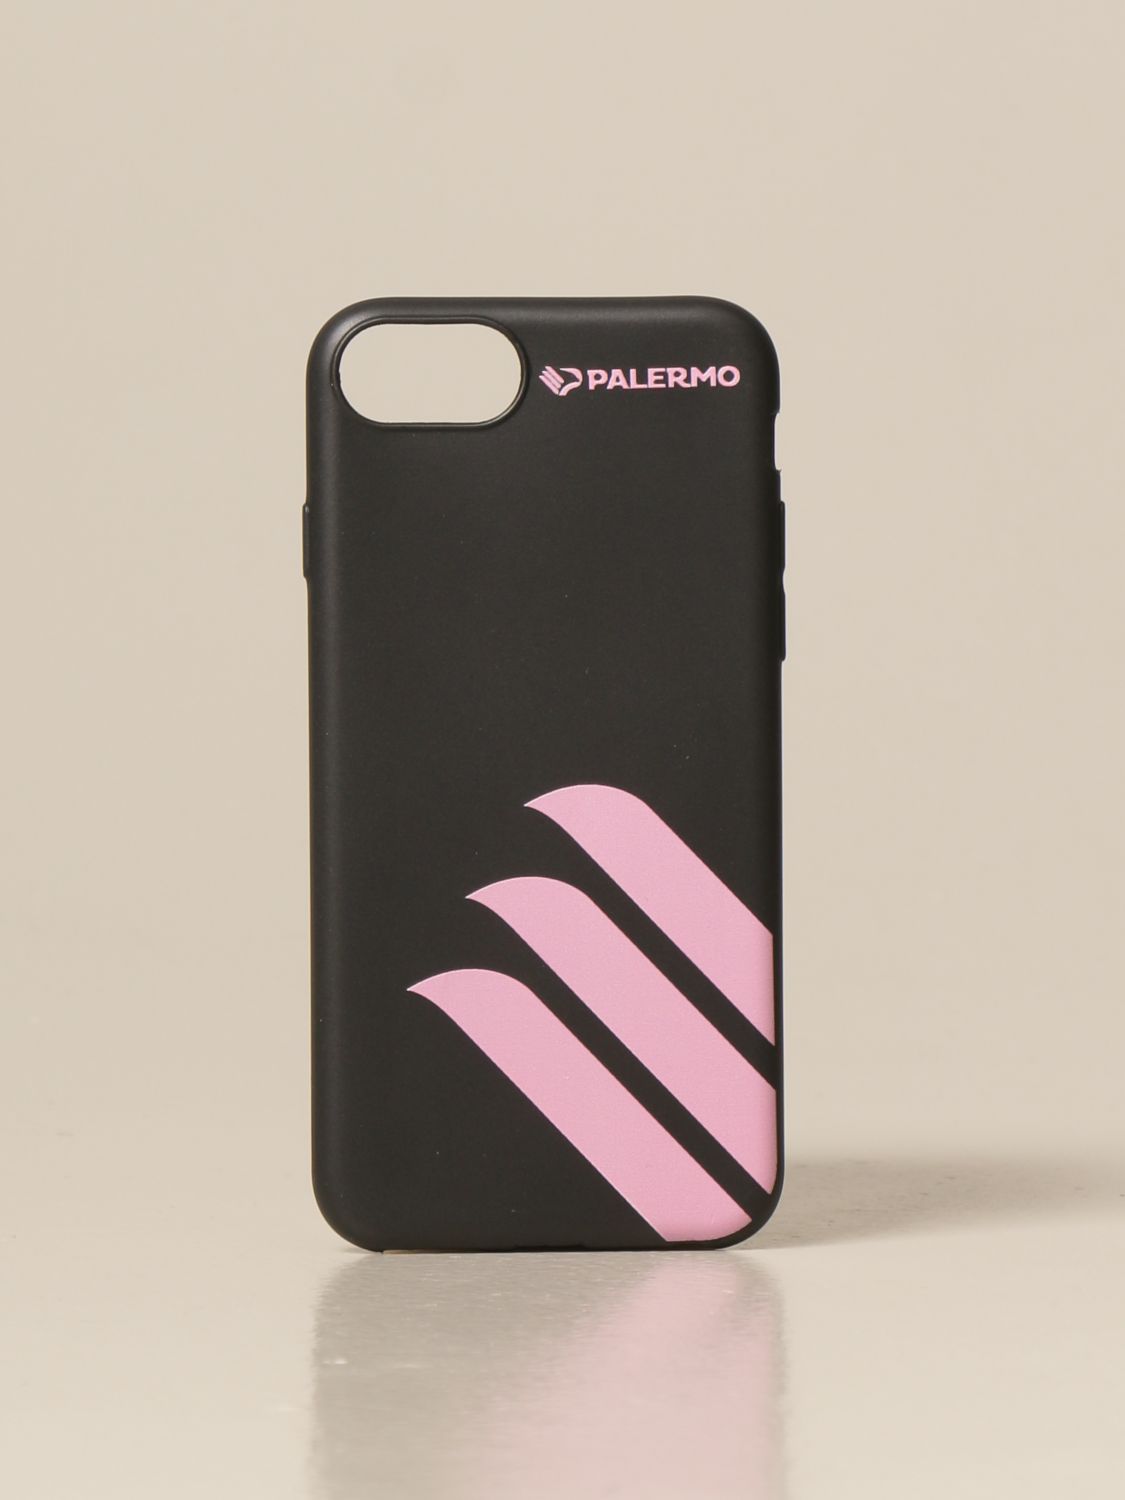 Cover Palermo: Palermo Herren Cover pink 10